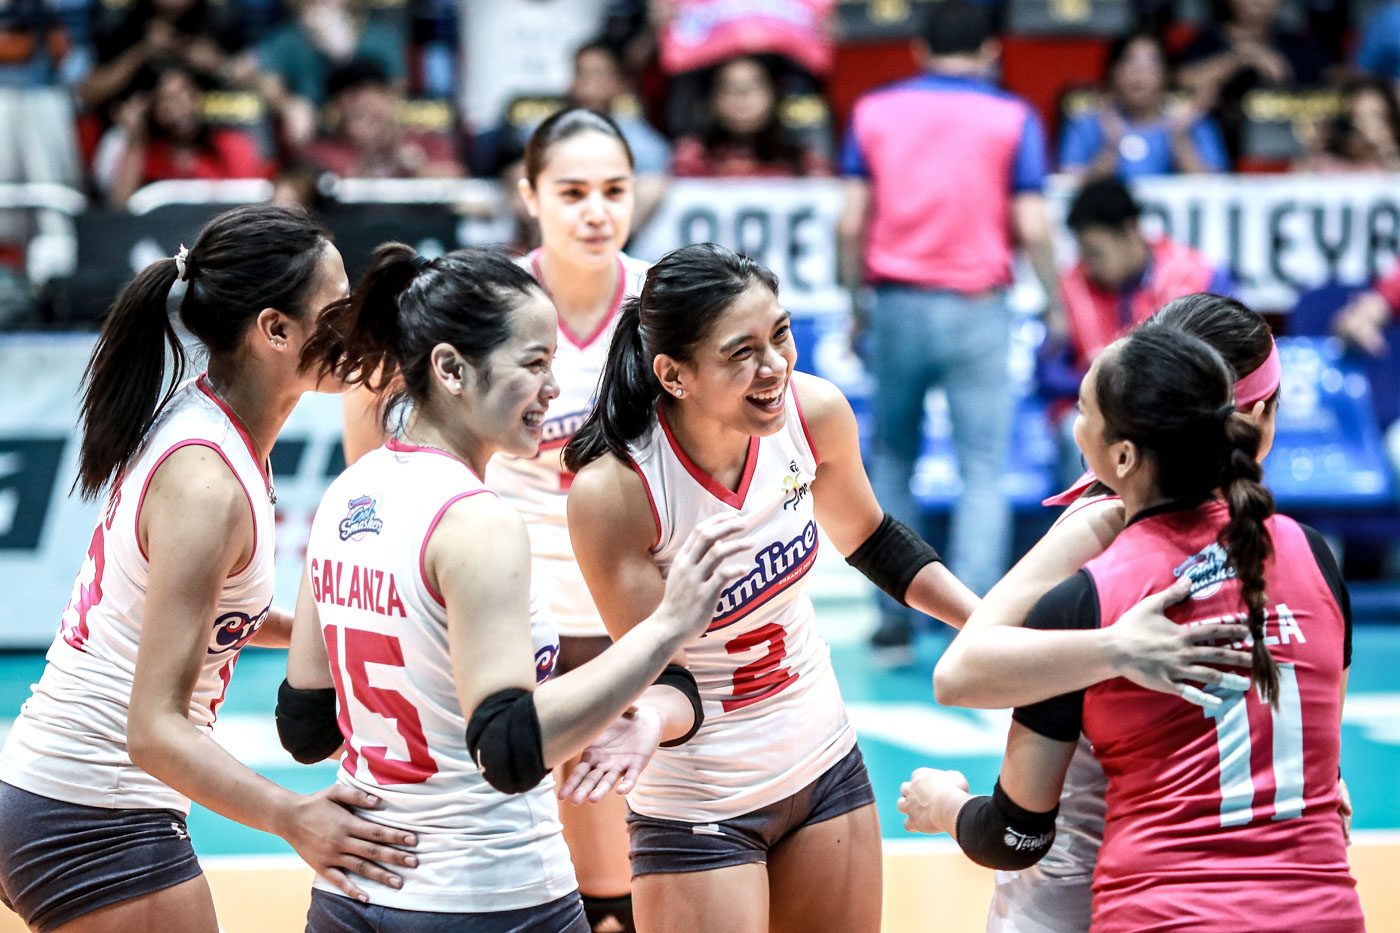 PVL gets green light to kick off on July 17